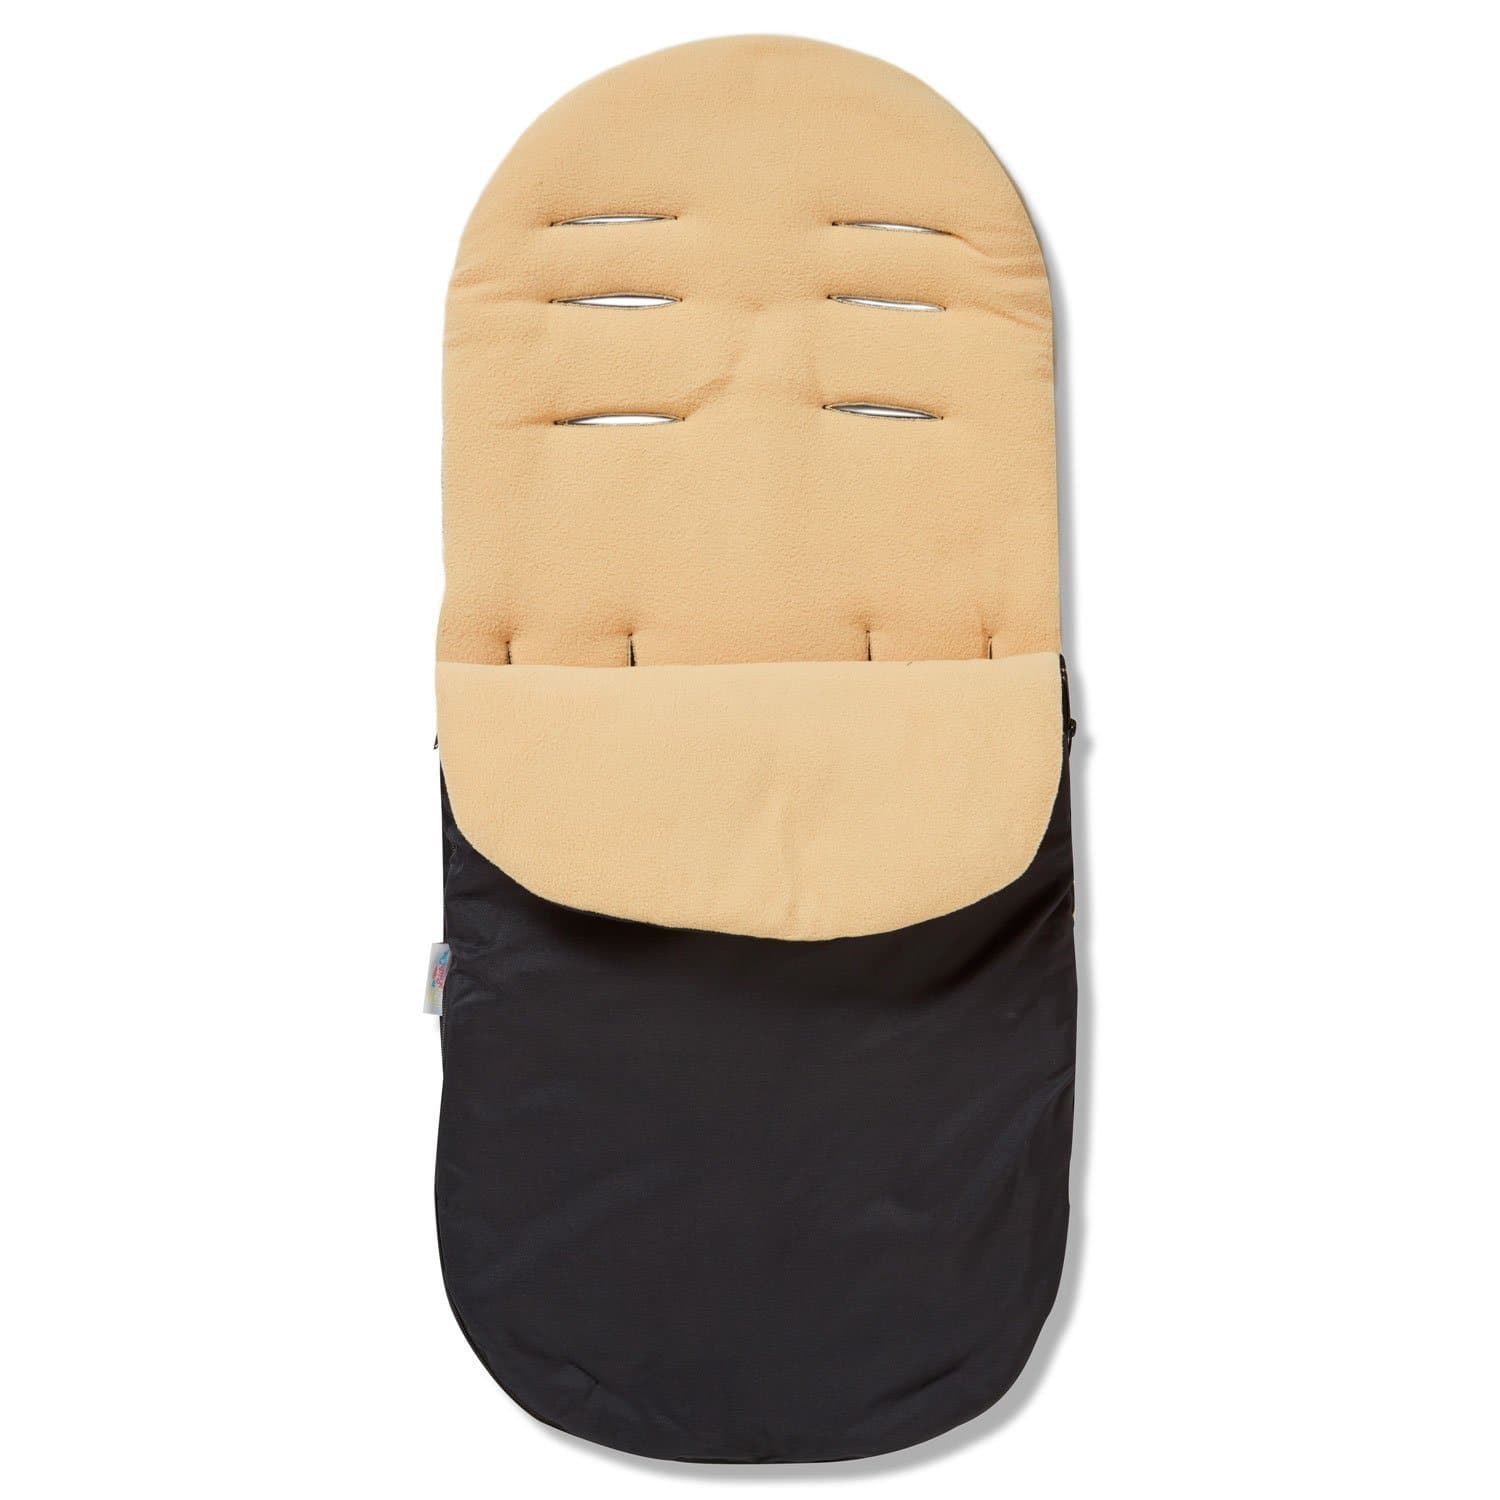 Footmuff / Cosy Toes Compatible with Petite - For Your Little One